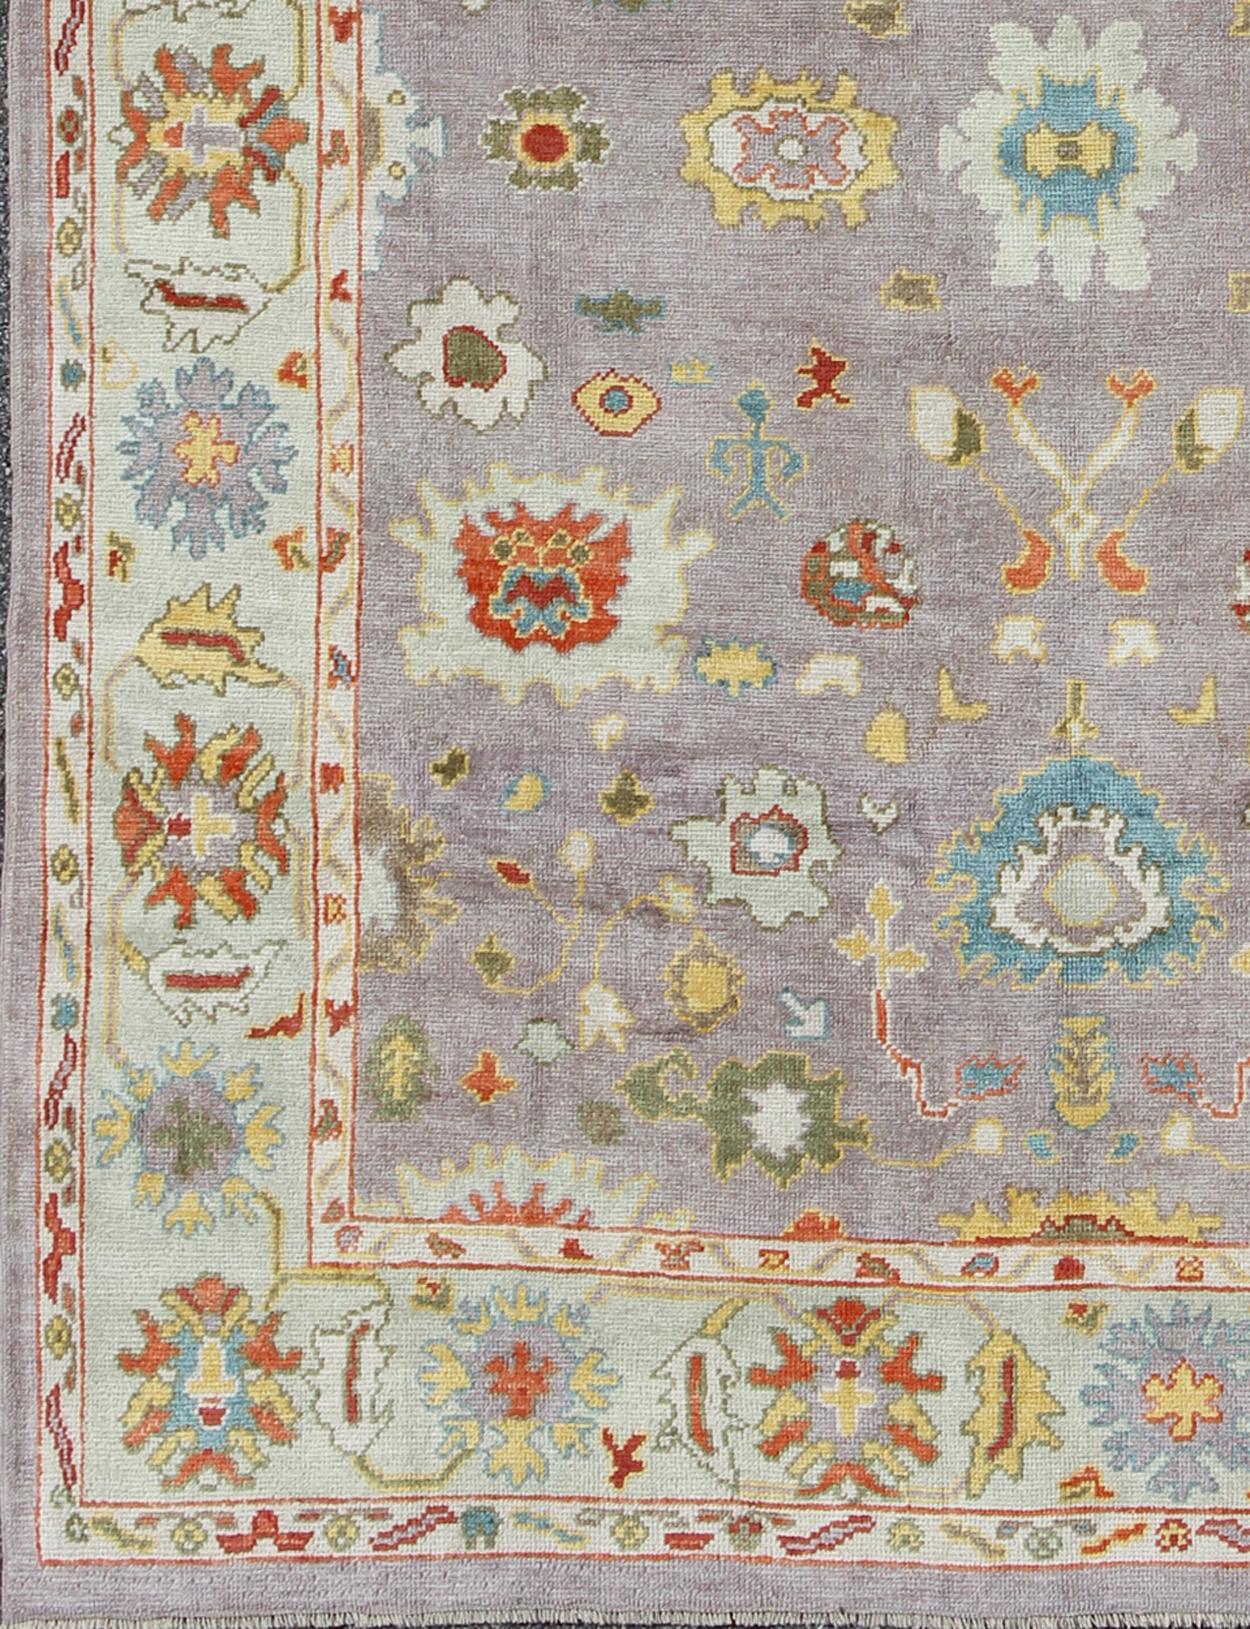 Beautiful Turkish Oushak rug with colorful palette and all-over flower design. Keivan Woven Arts/rug en-165630, country of origin / type: Turkey / Oushak

Measures: 8'2 x 10'5.

This traditional Oushak rug from Turkey features a colorful palette and